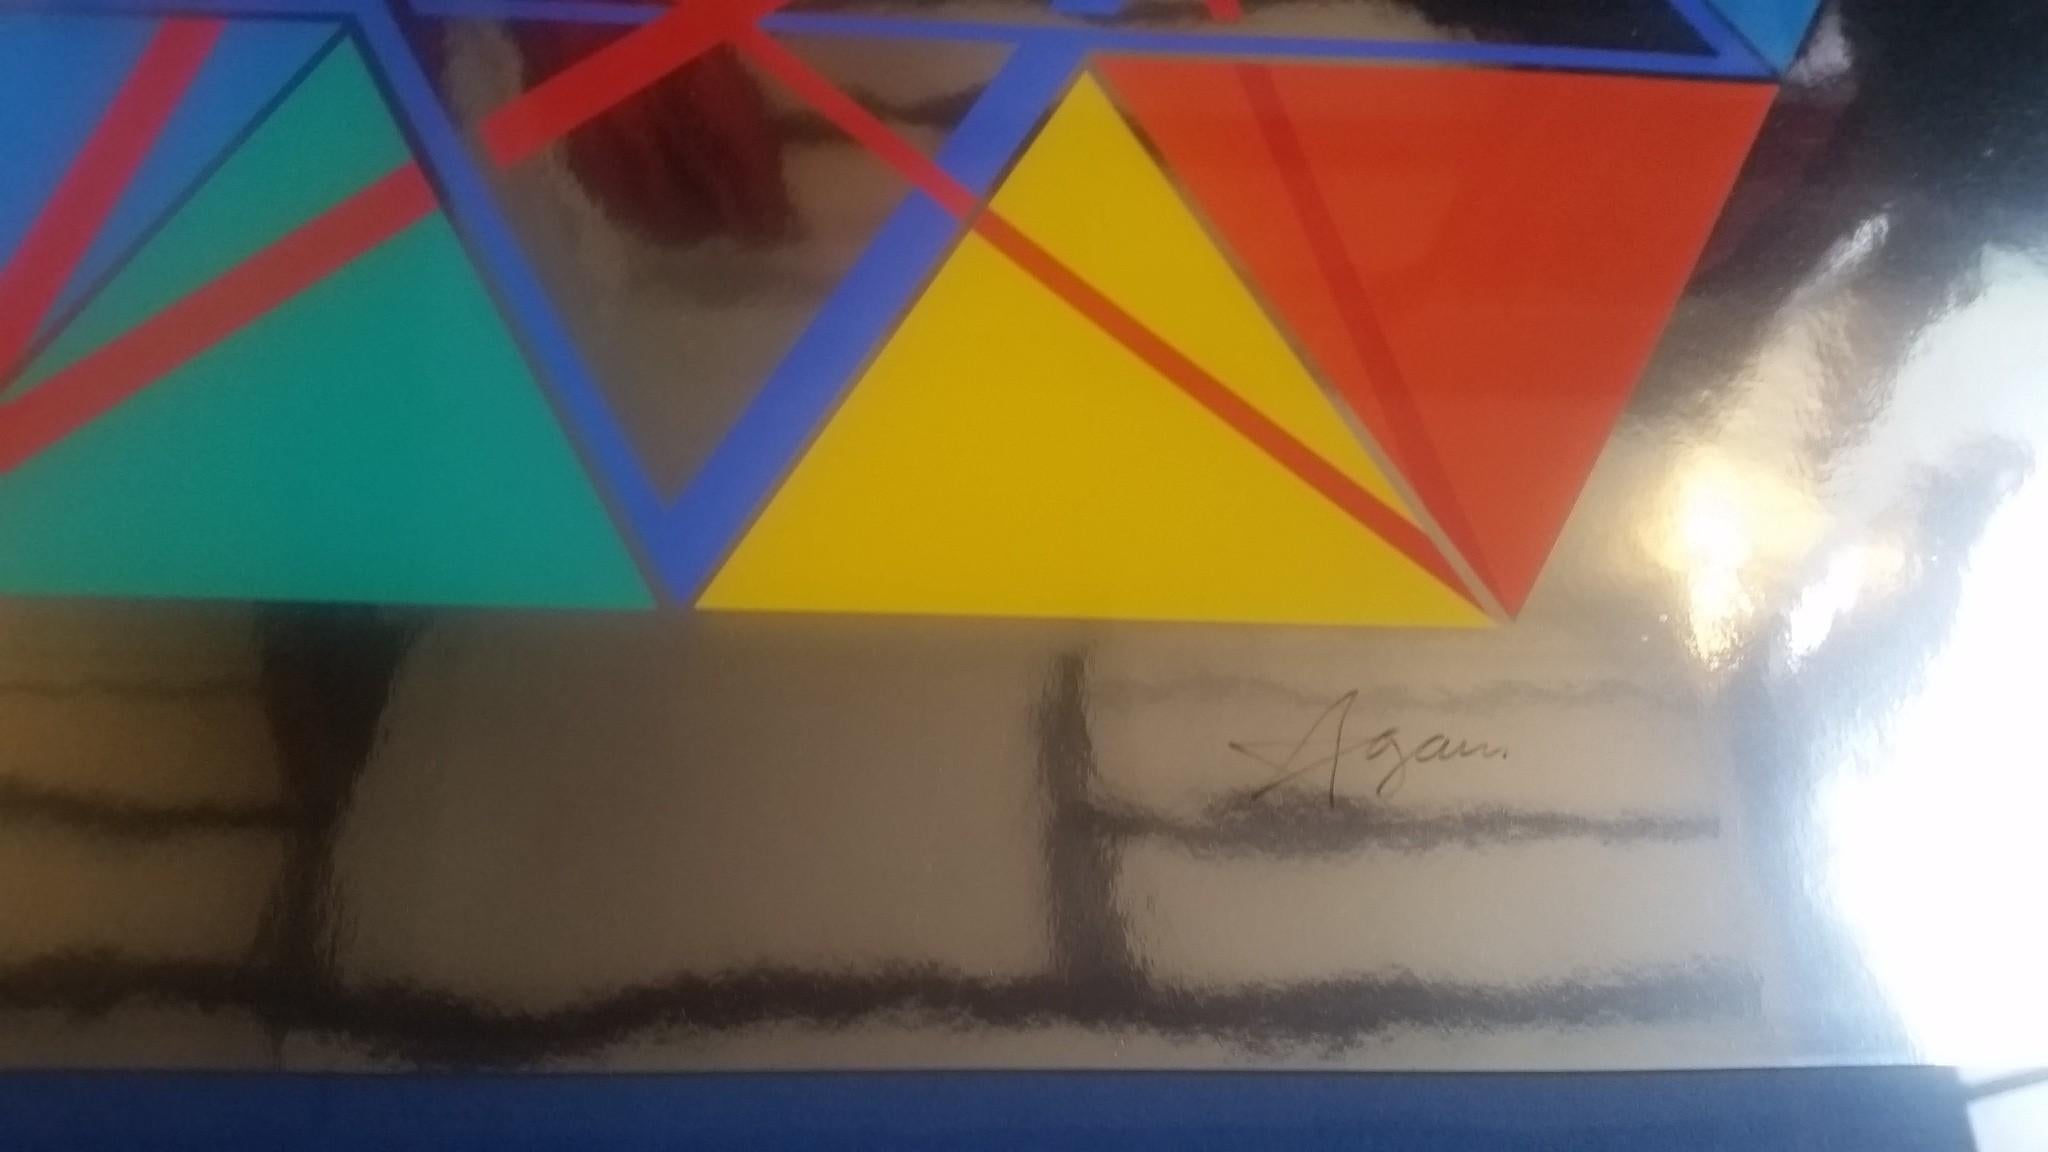 Yaacov Agam - Star of David - Abstract Illusionism, 1979, Serigraph signed
Signed and numbered by the artist edition 223 / 250
With frame
Size of the work : 60 x 53 cm
Dimensions with frame : 75 x 69 x 3,5 cm
Price : 1400€ for this work